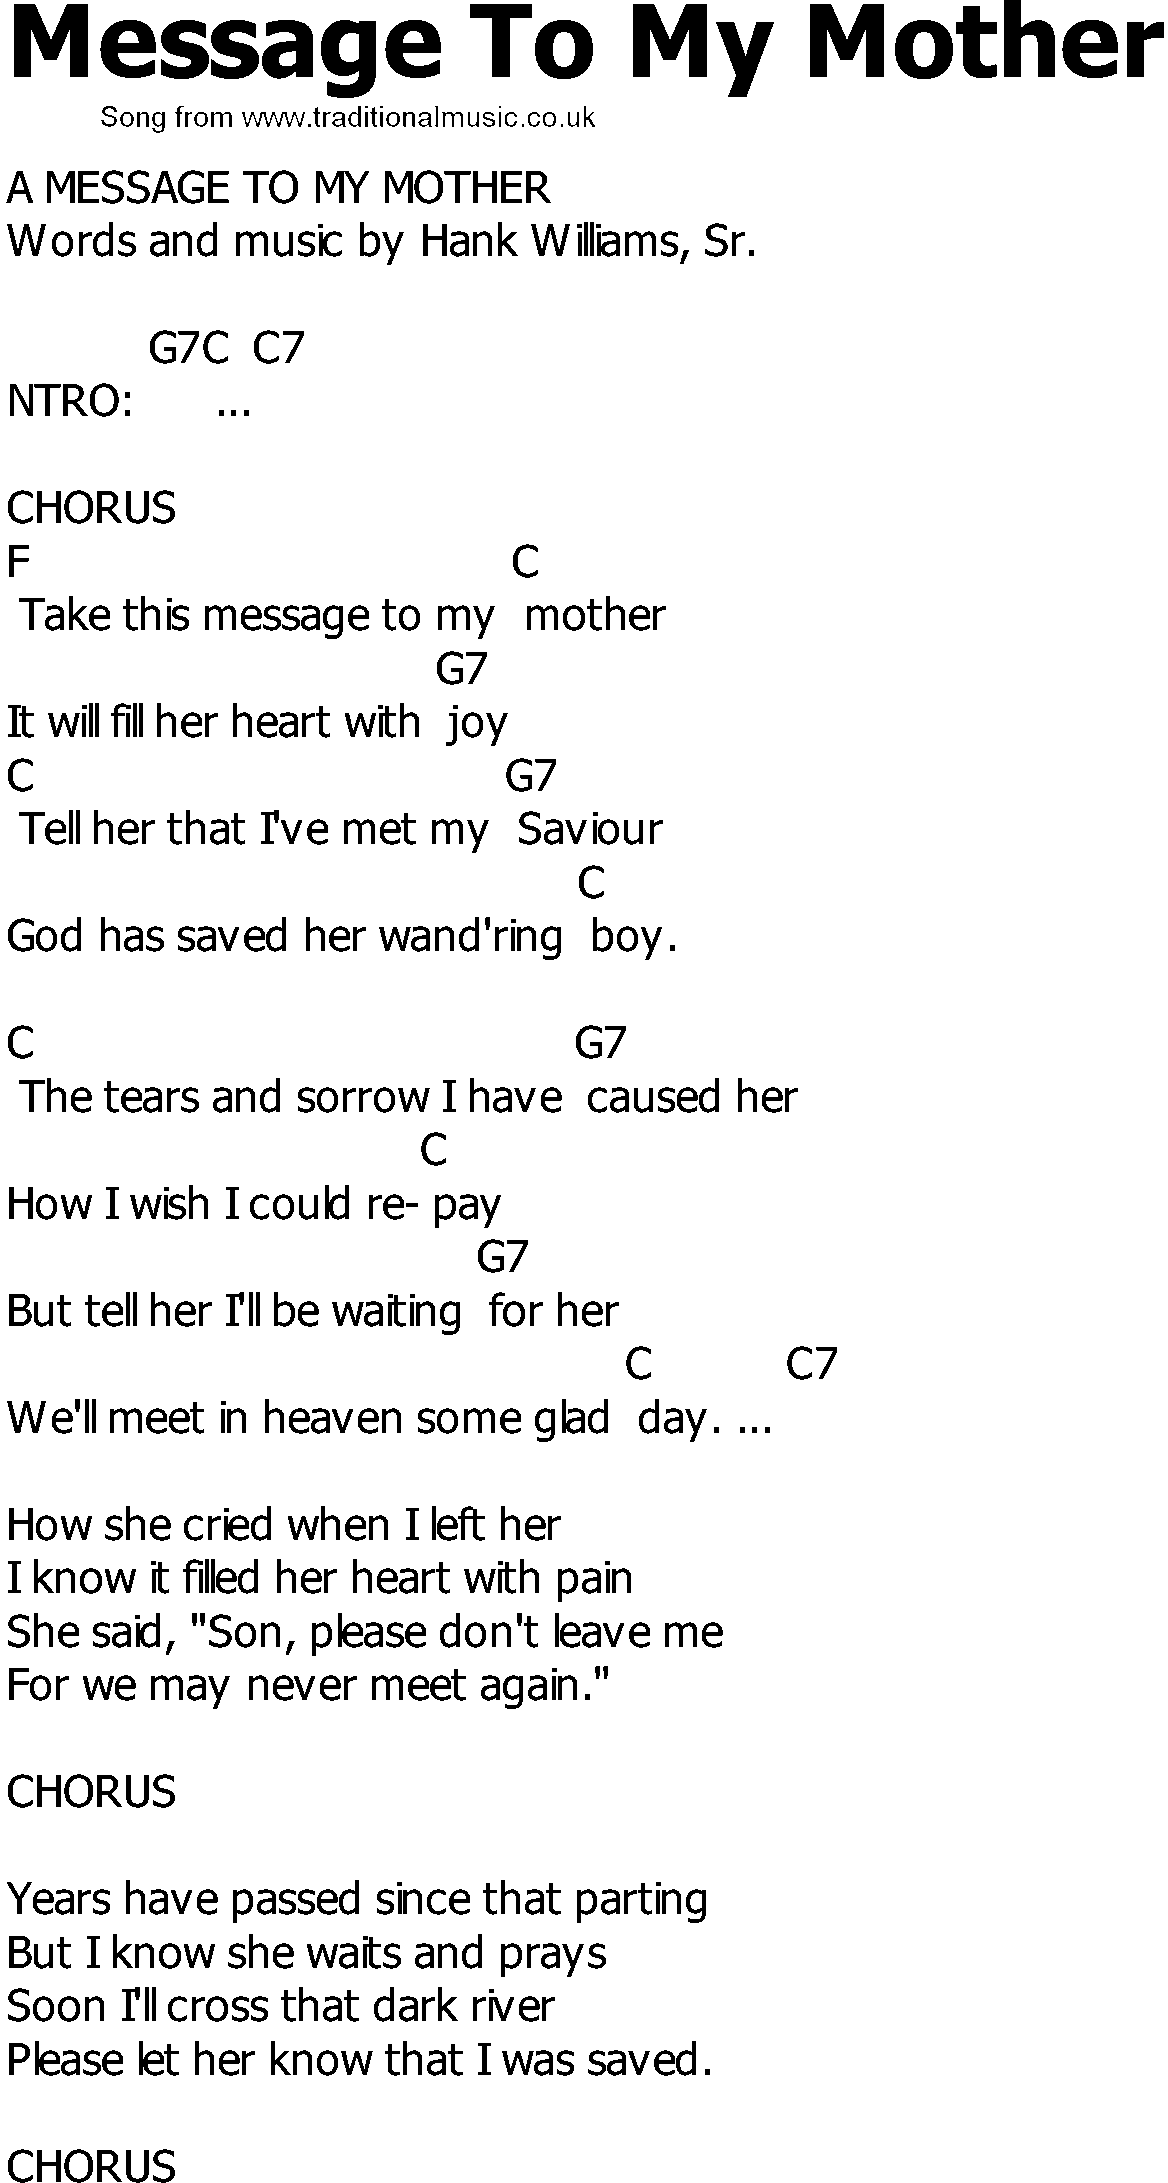 Old Country song lyrics with chords - Message To My Mother